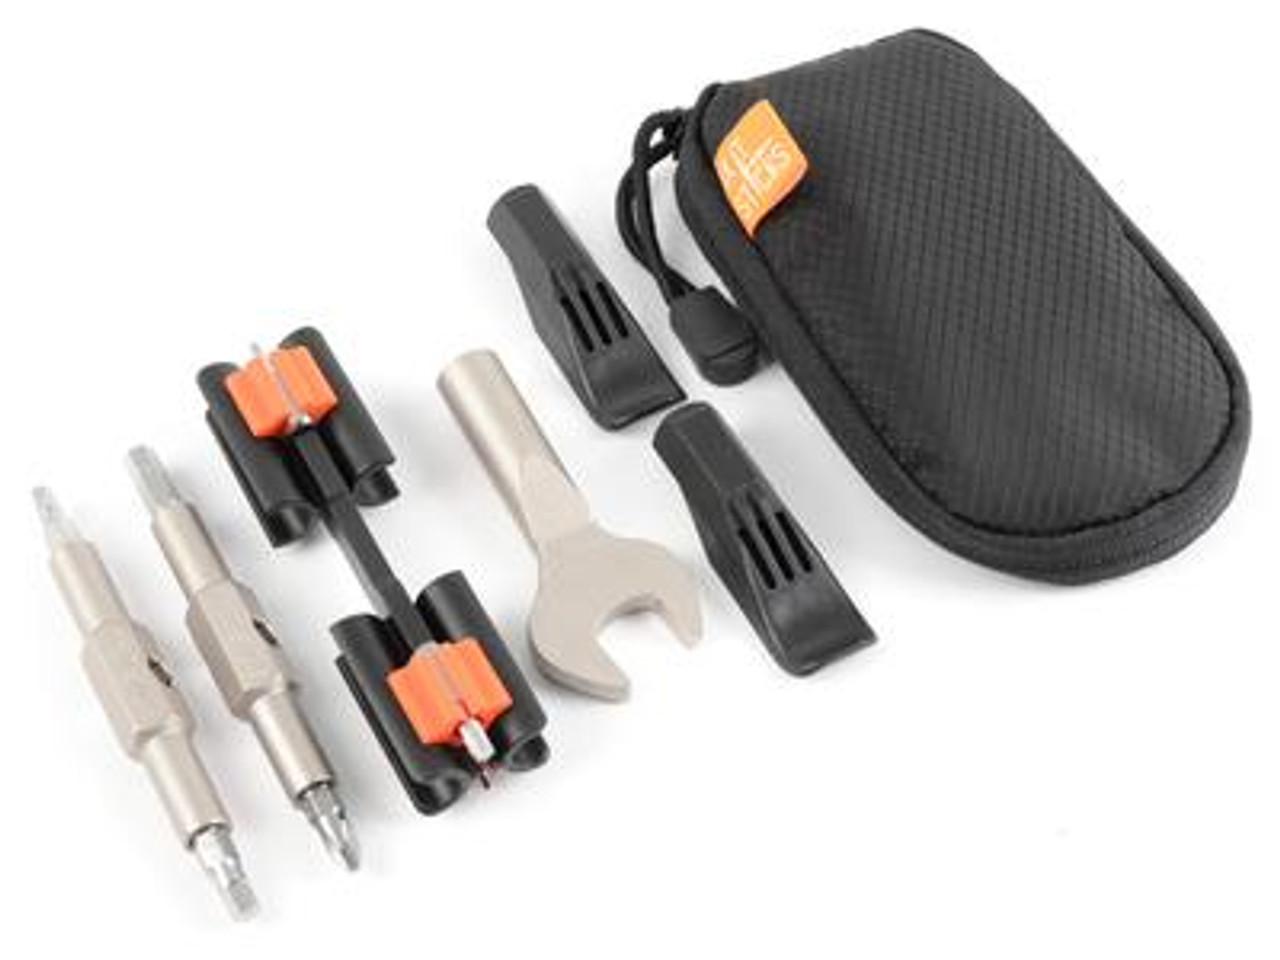 Fix It Sticks, Commuter Kit Tools & Case Included - CSC Motorcycles